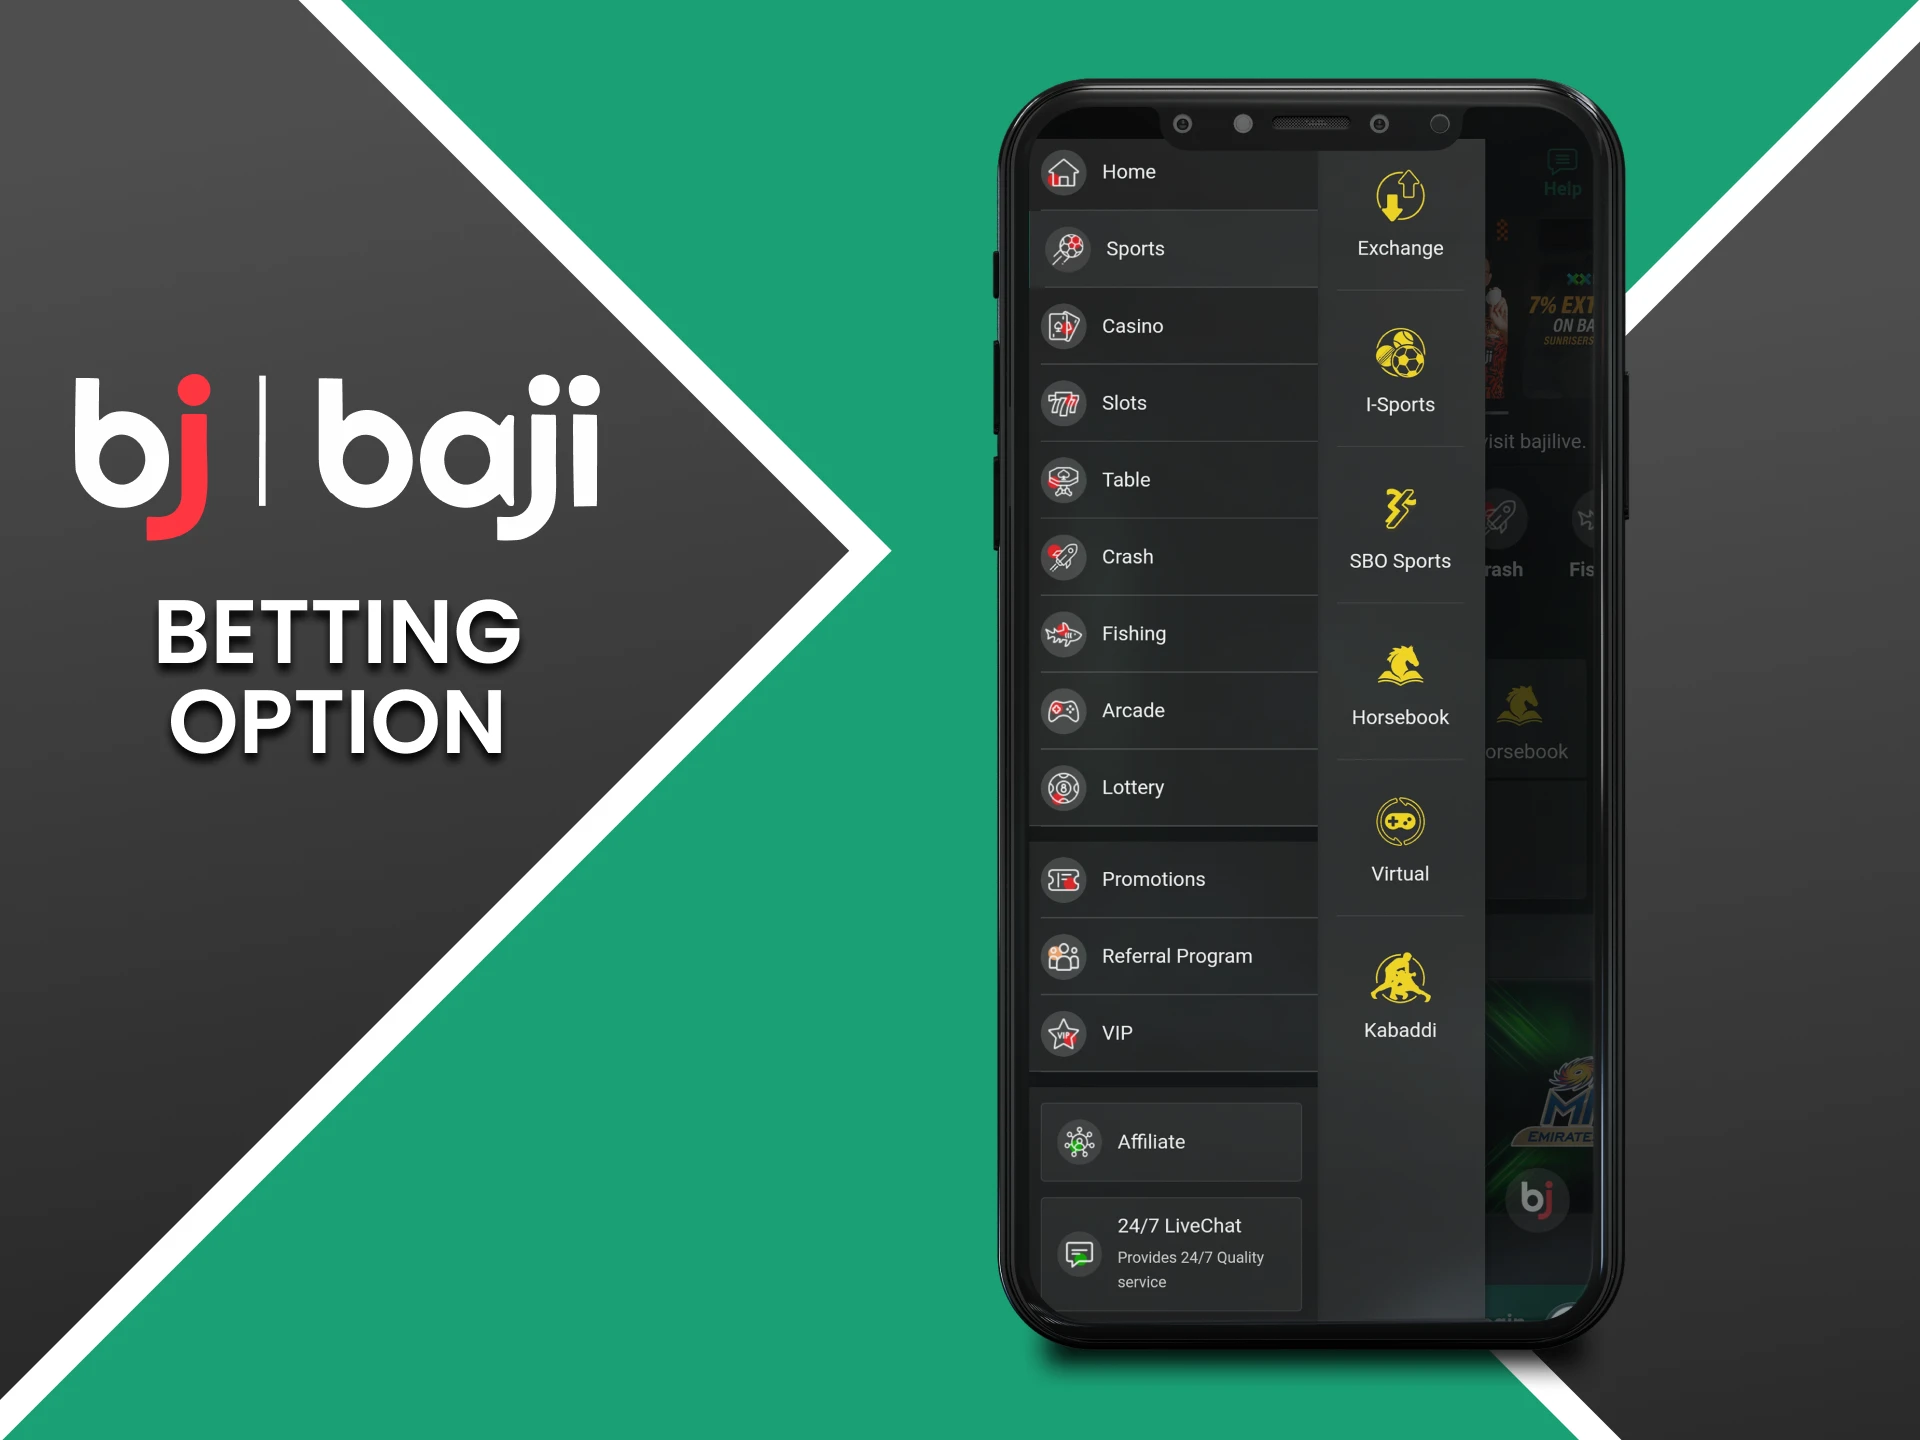 You can place bets using the Baji app BD and in the other countries.